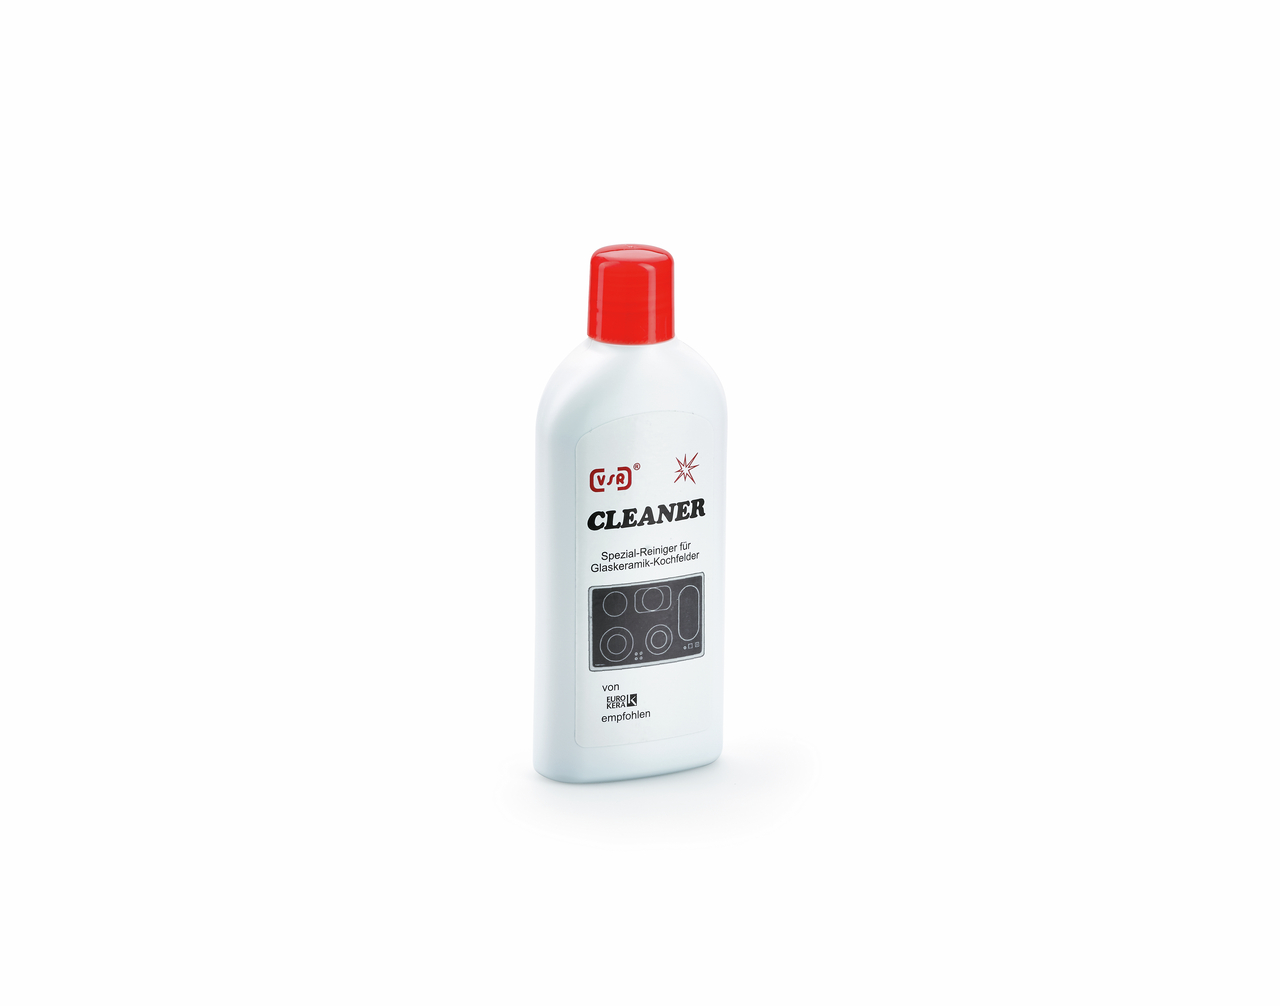  Ceramic stove top cleaning agent CLEANER, 200 ml